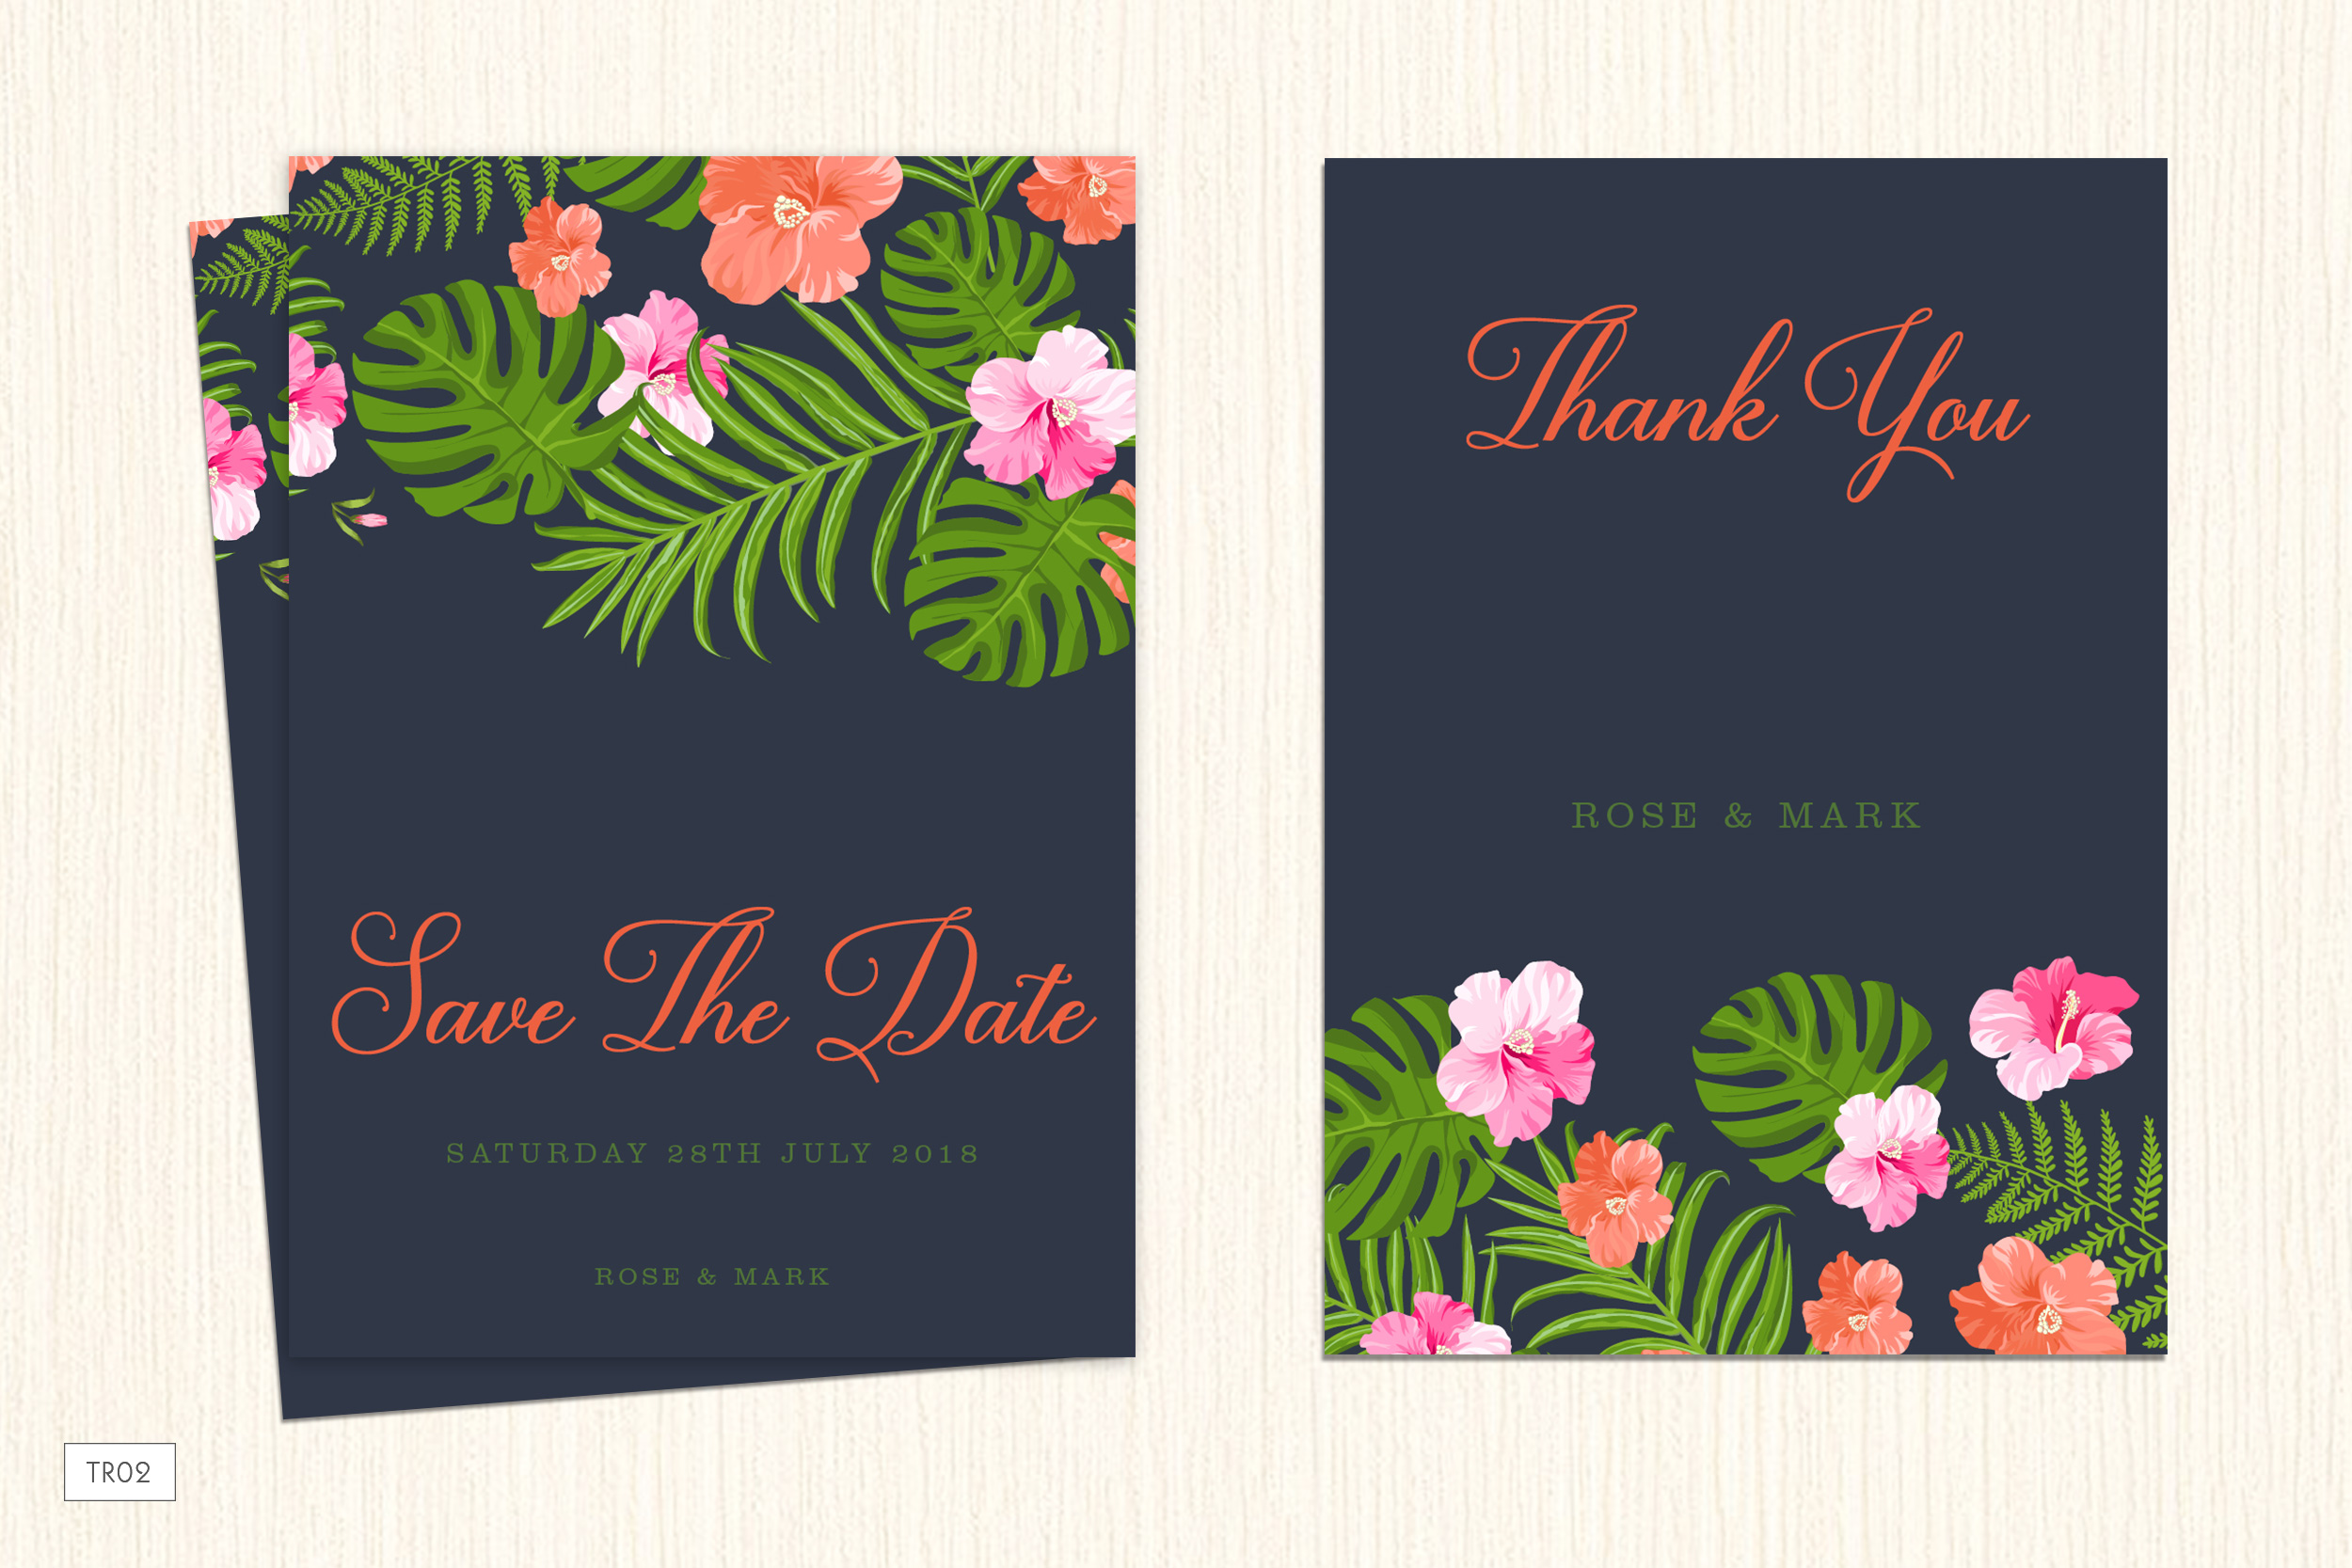 tr02-tropics-save-the-date-thank-you.jpg